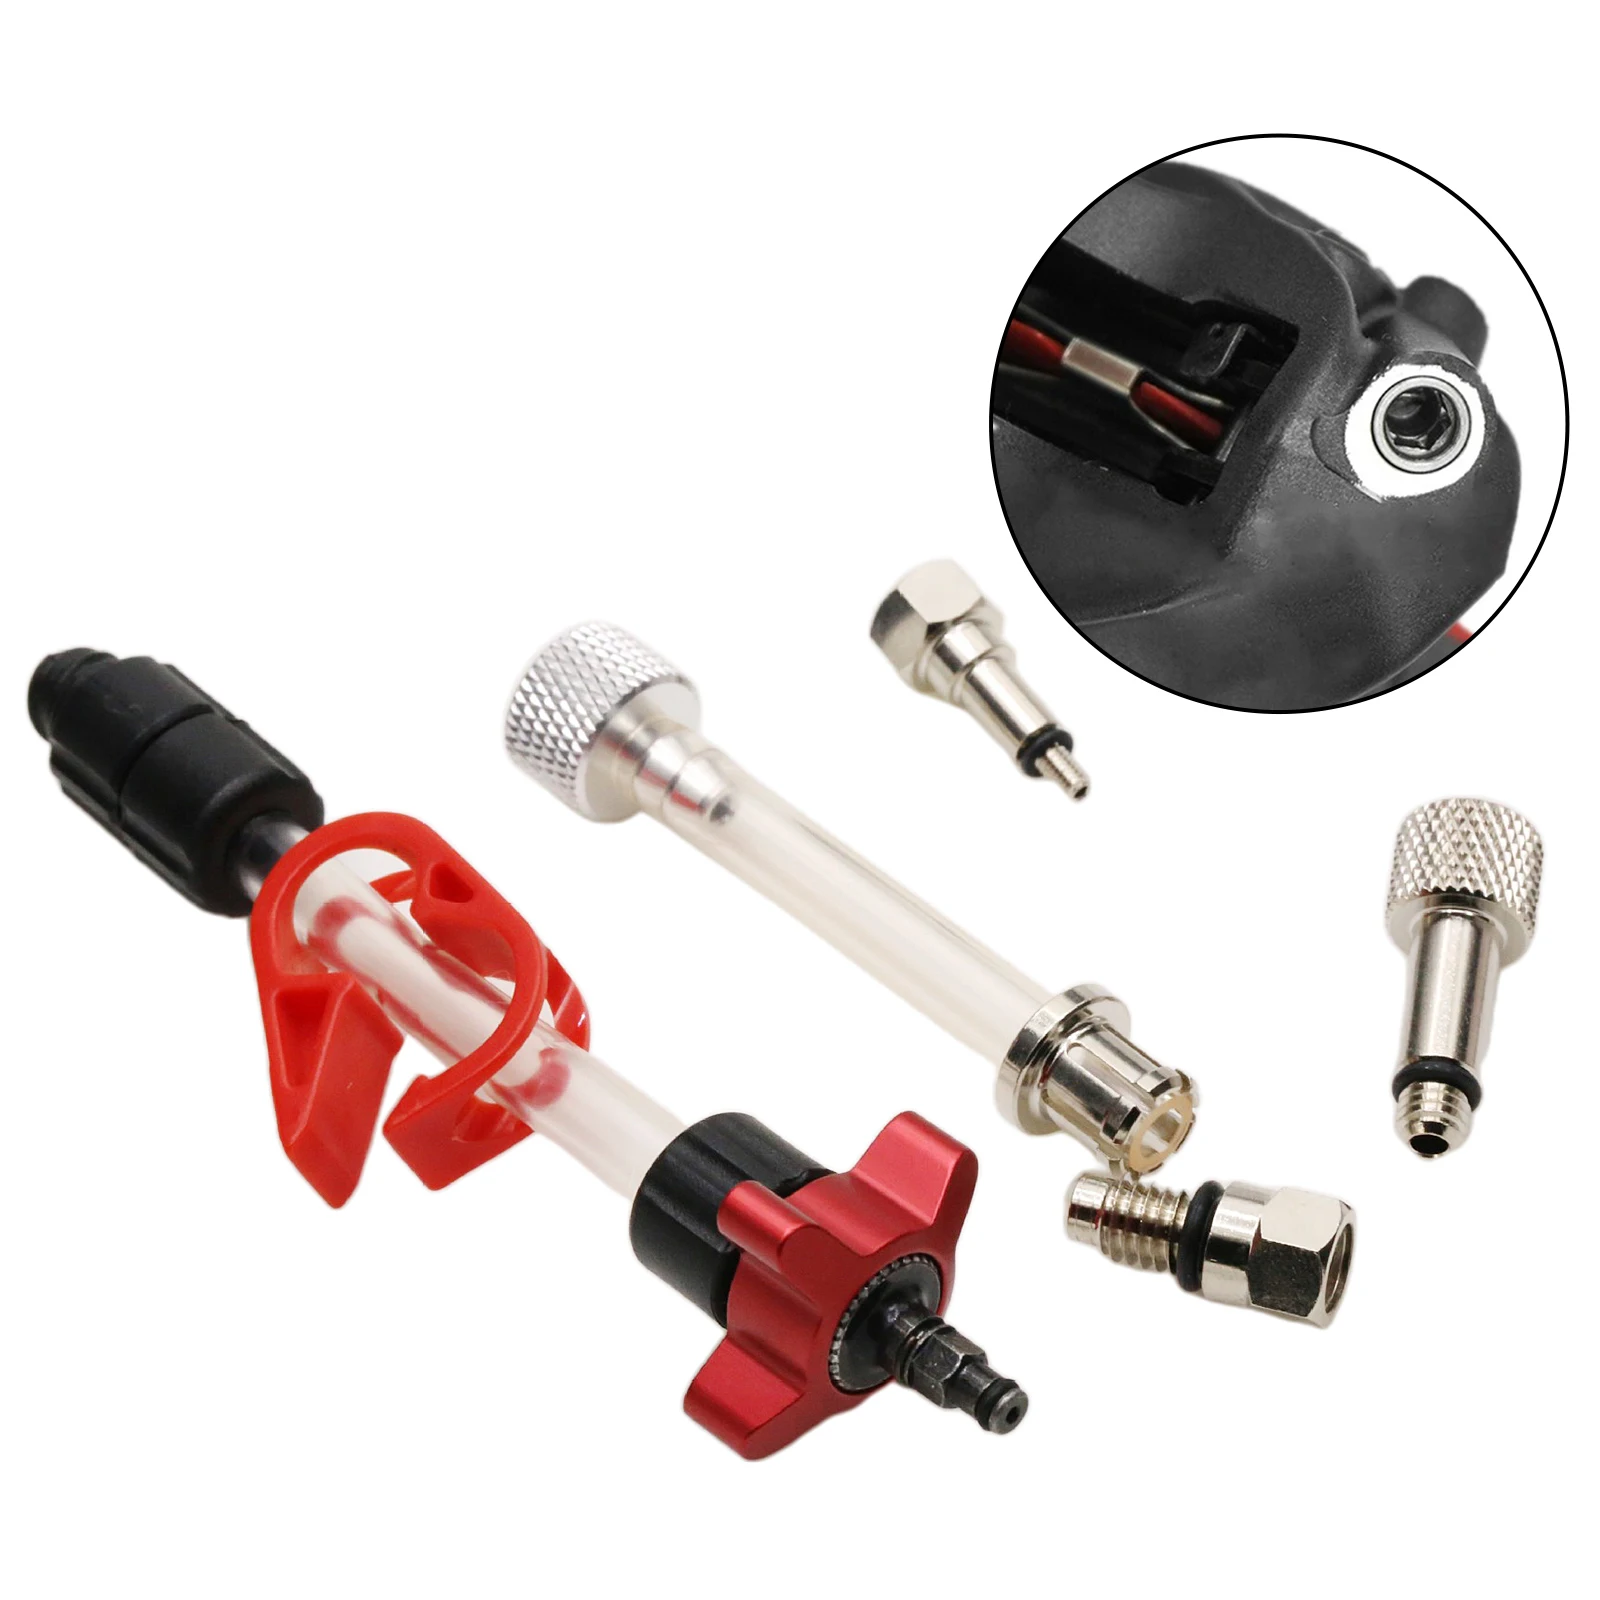  POINT Oil Bleed Kit Spare Parts  Hydraulic Disc Brake Bleeding Tools Fitting Adapter for Edge Fit Promax